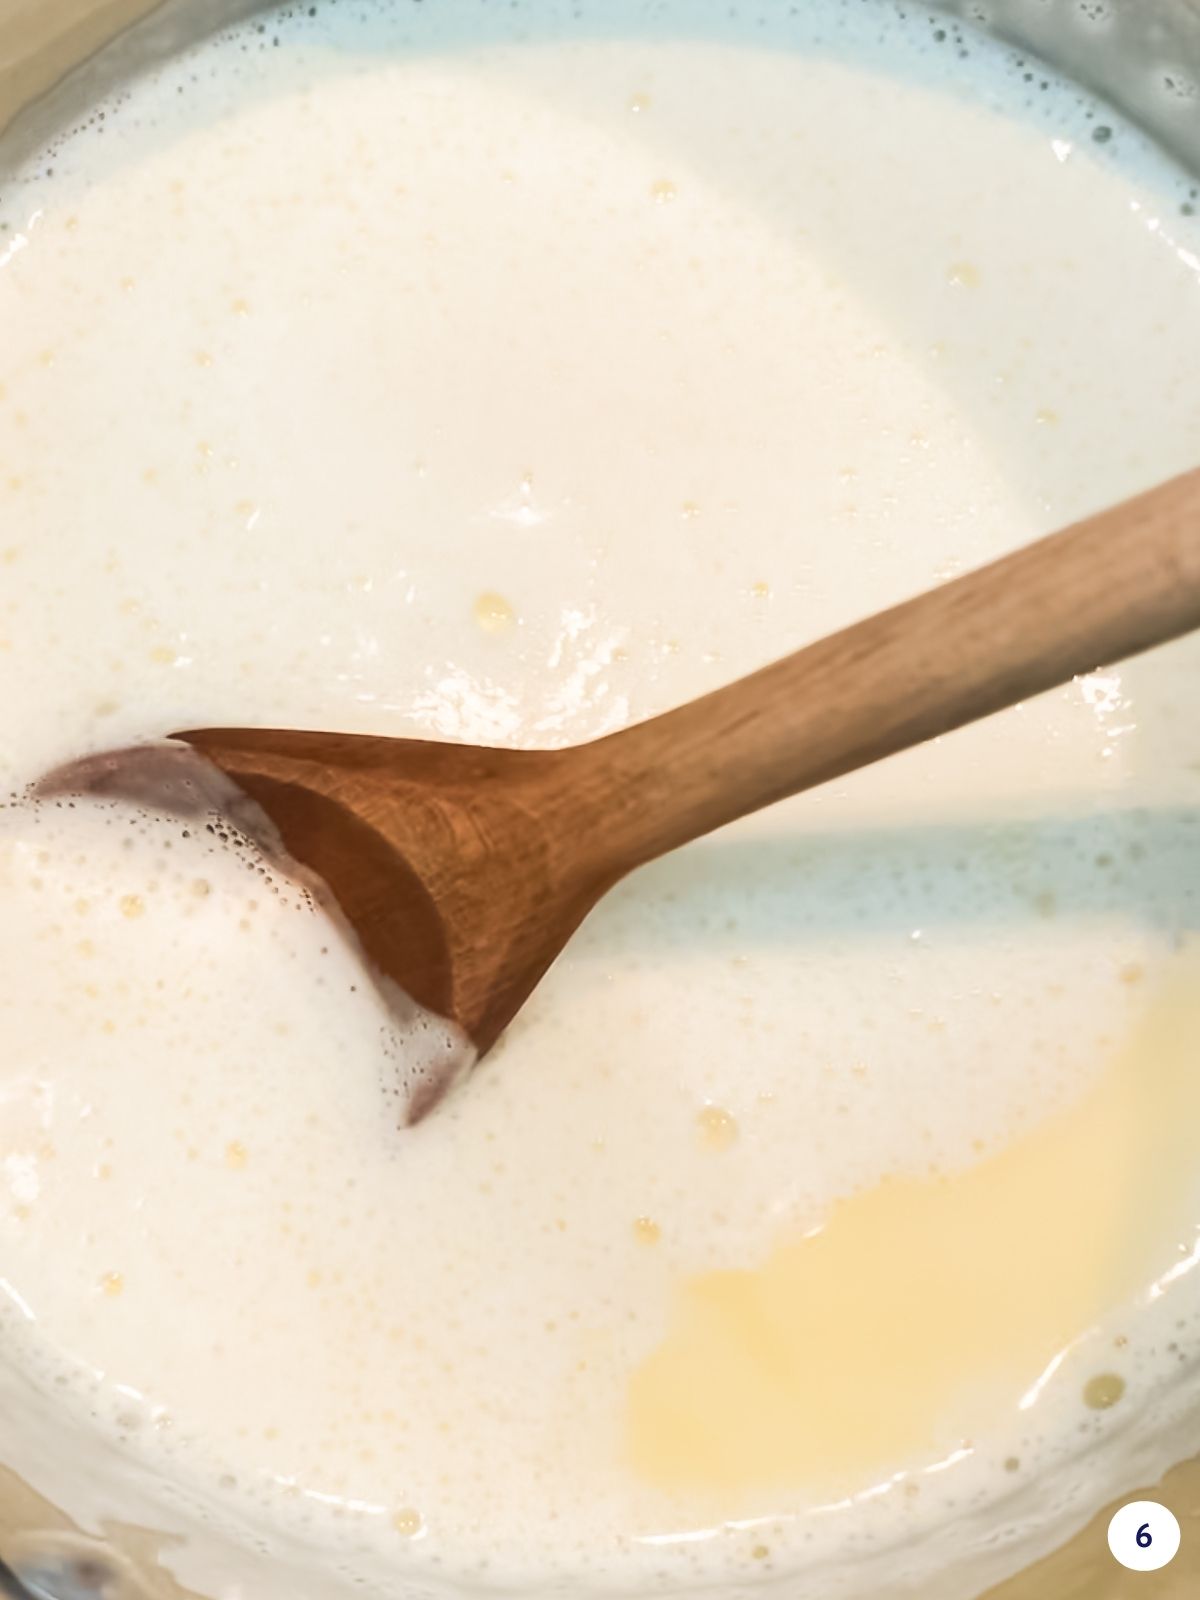 Heating custard sauce on the stove in a saucepan with a wooden spoon to slowly thicken it.